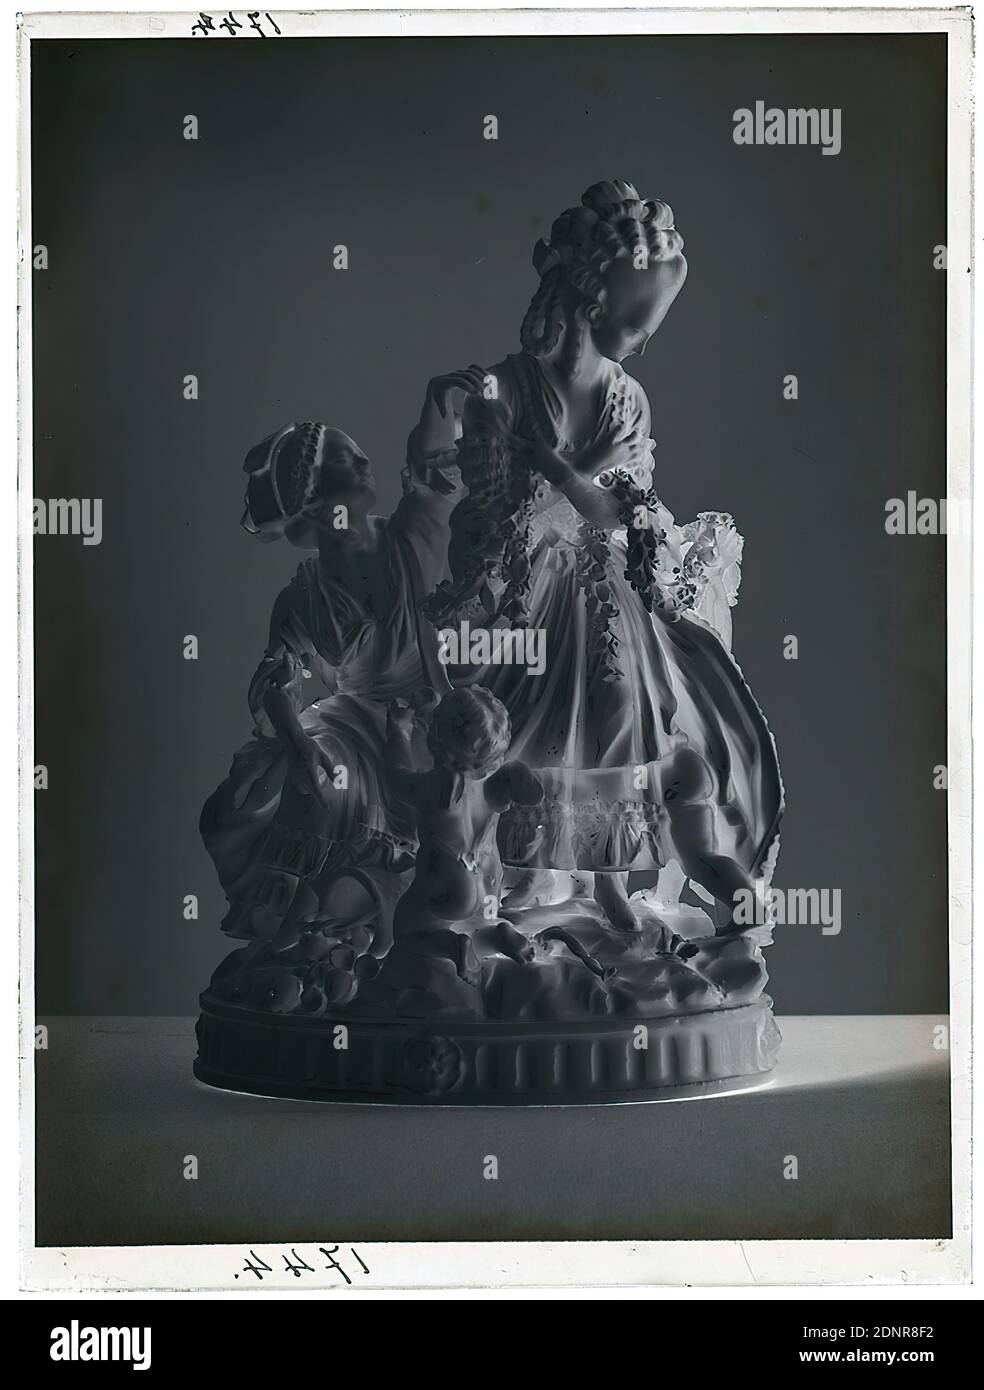 Wilhelm Weimar, small sculpture The Matchmaker, glass negative, black and white negative process, total: height: 23.8 cm; width: 17.8 cm, numbered: top left: in black ink: 1744, numbered: bottom left: in black ink: 1744. The Museum of Applied Arts (ceramics), handicrafts, arts and crafts, industrial design, works of applied art (ceramics Stock Photo